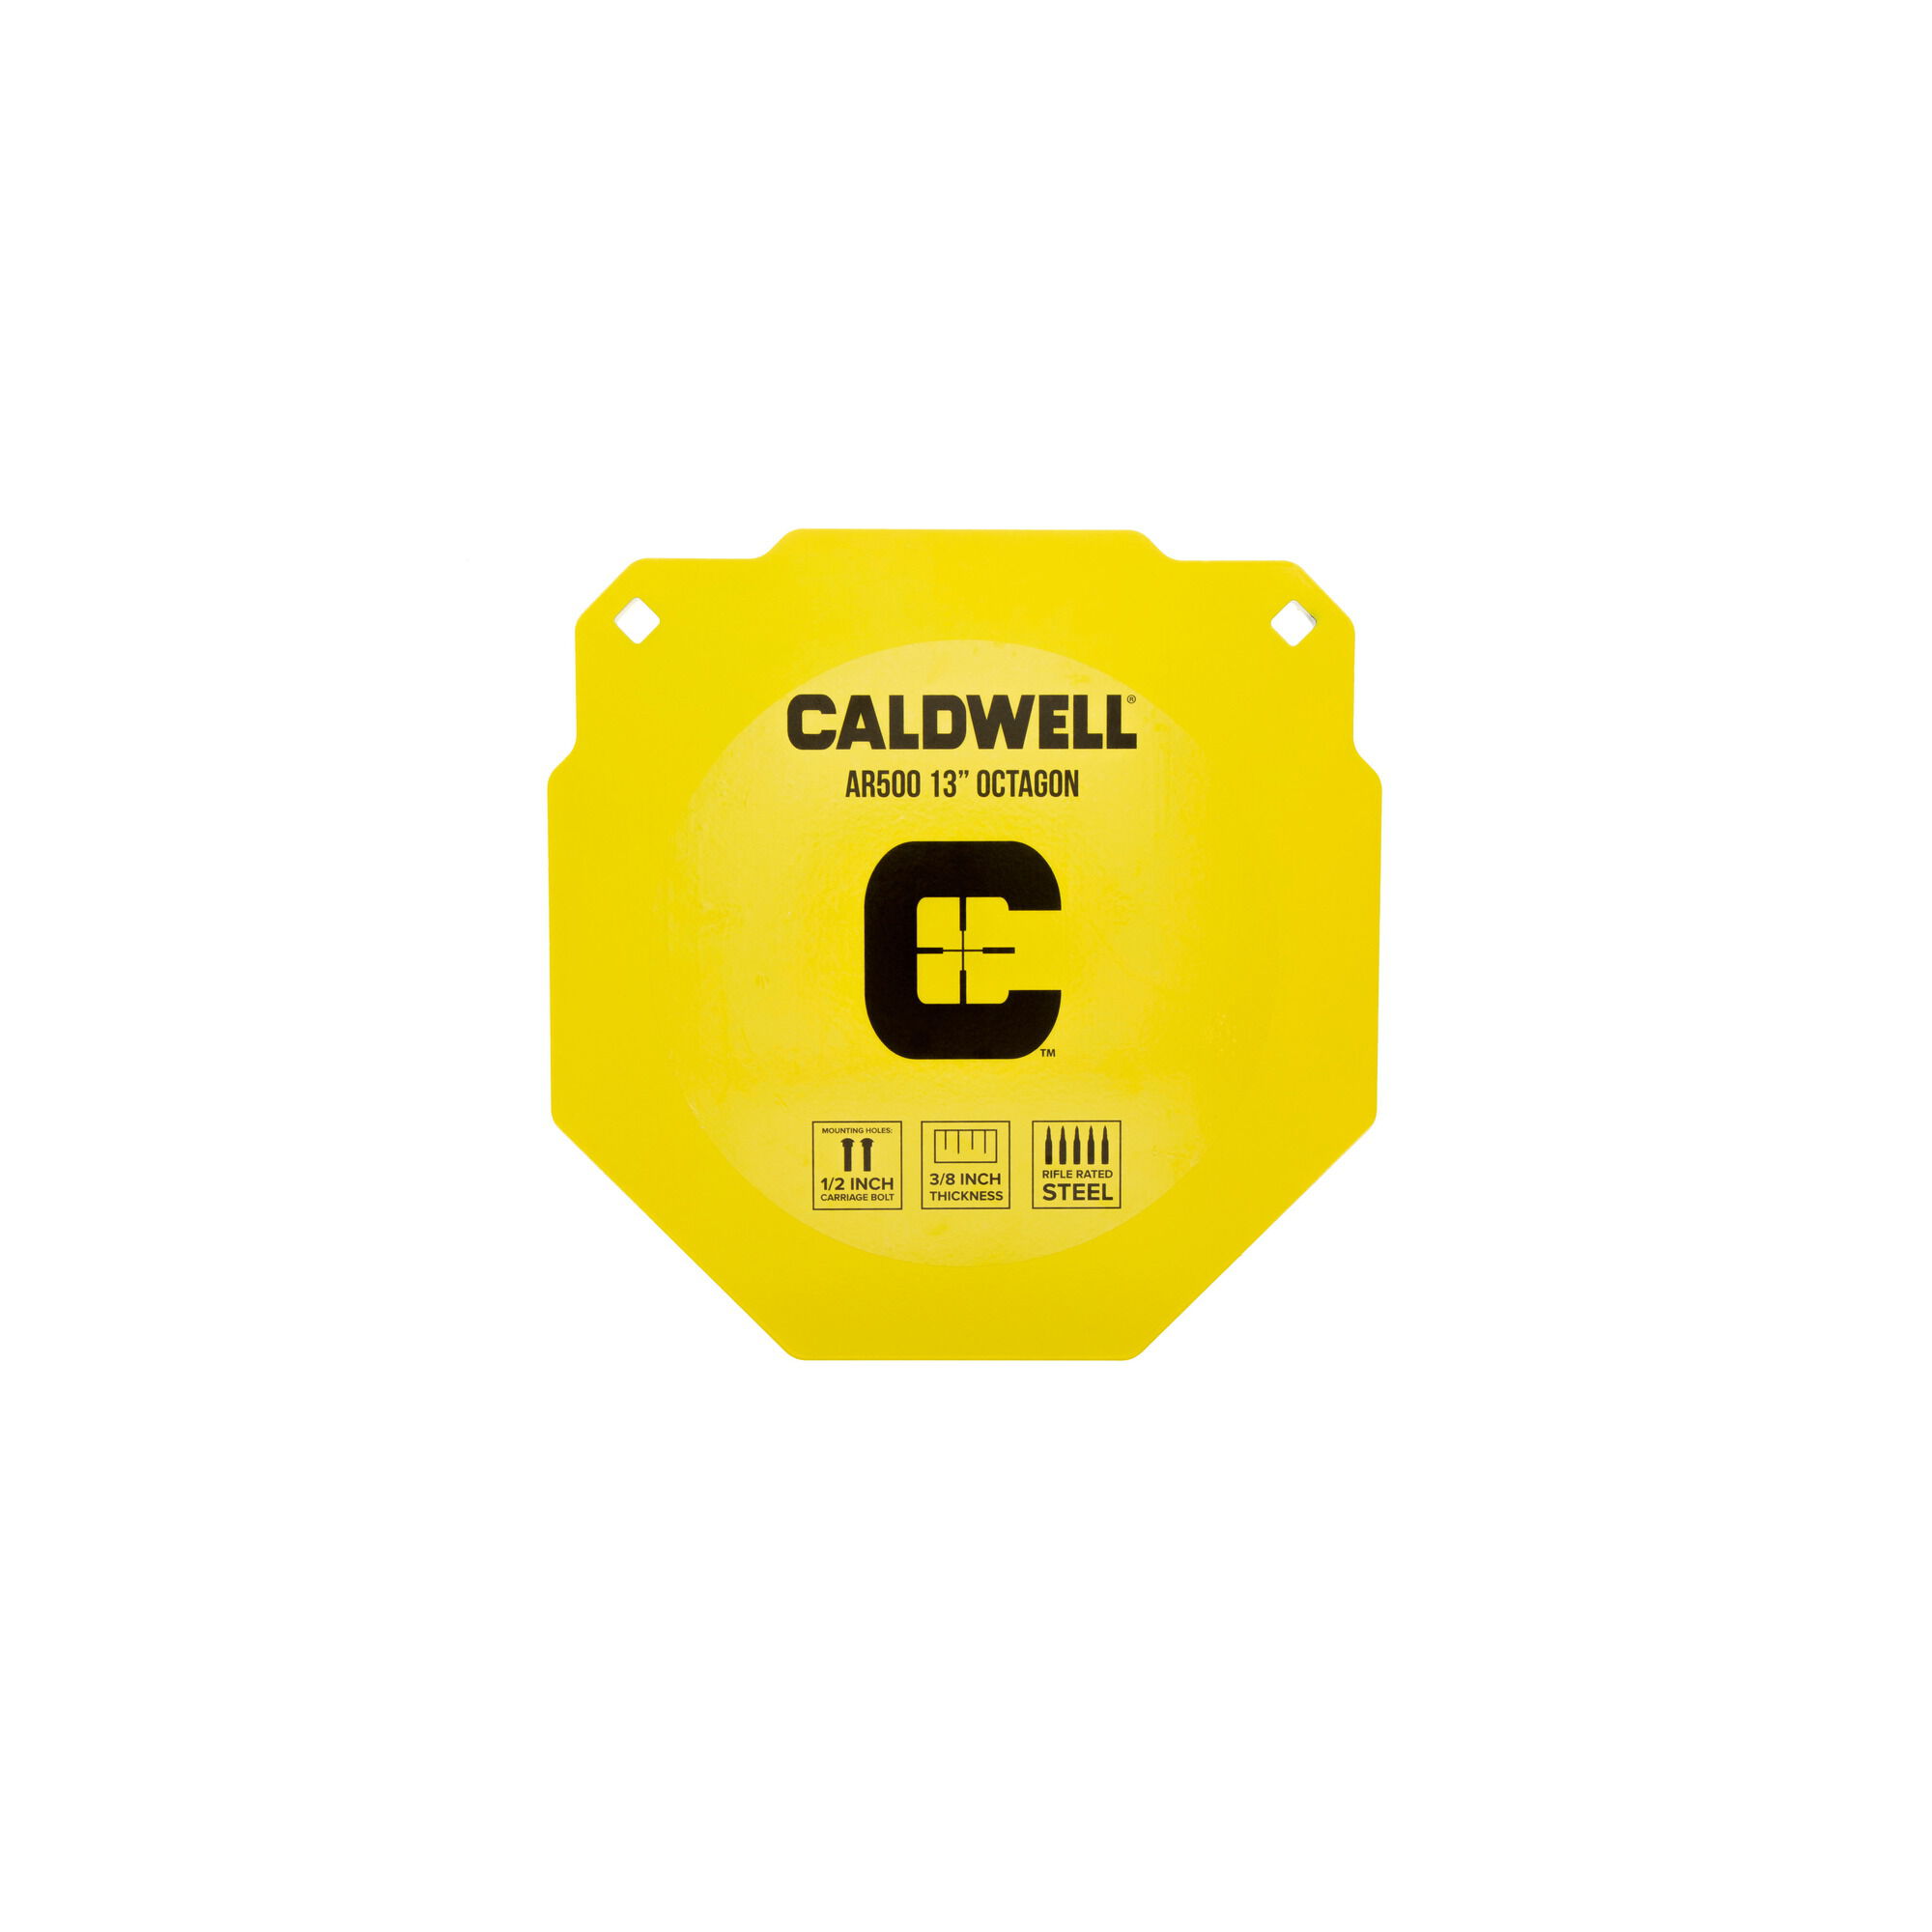 Sold Separately Rifle Rated for Precision Shooting and Target Practice with Hanging Options Caldwell High Caliber AR500 Steel Targets 3/8 Inch Thickness 